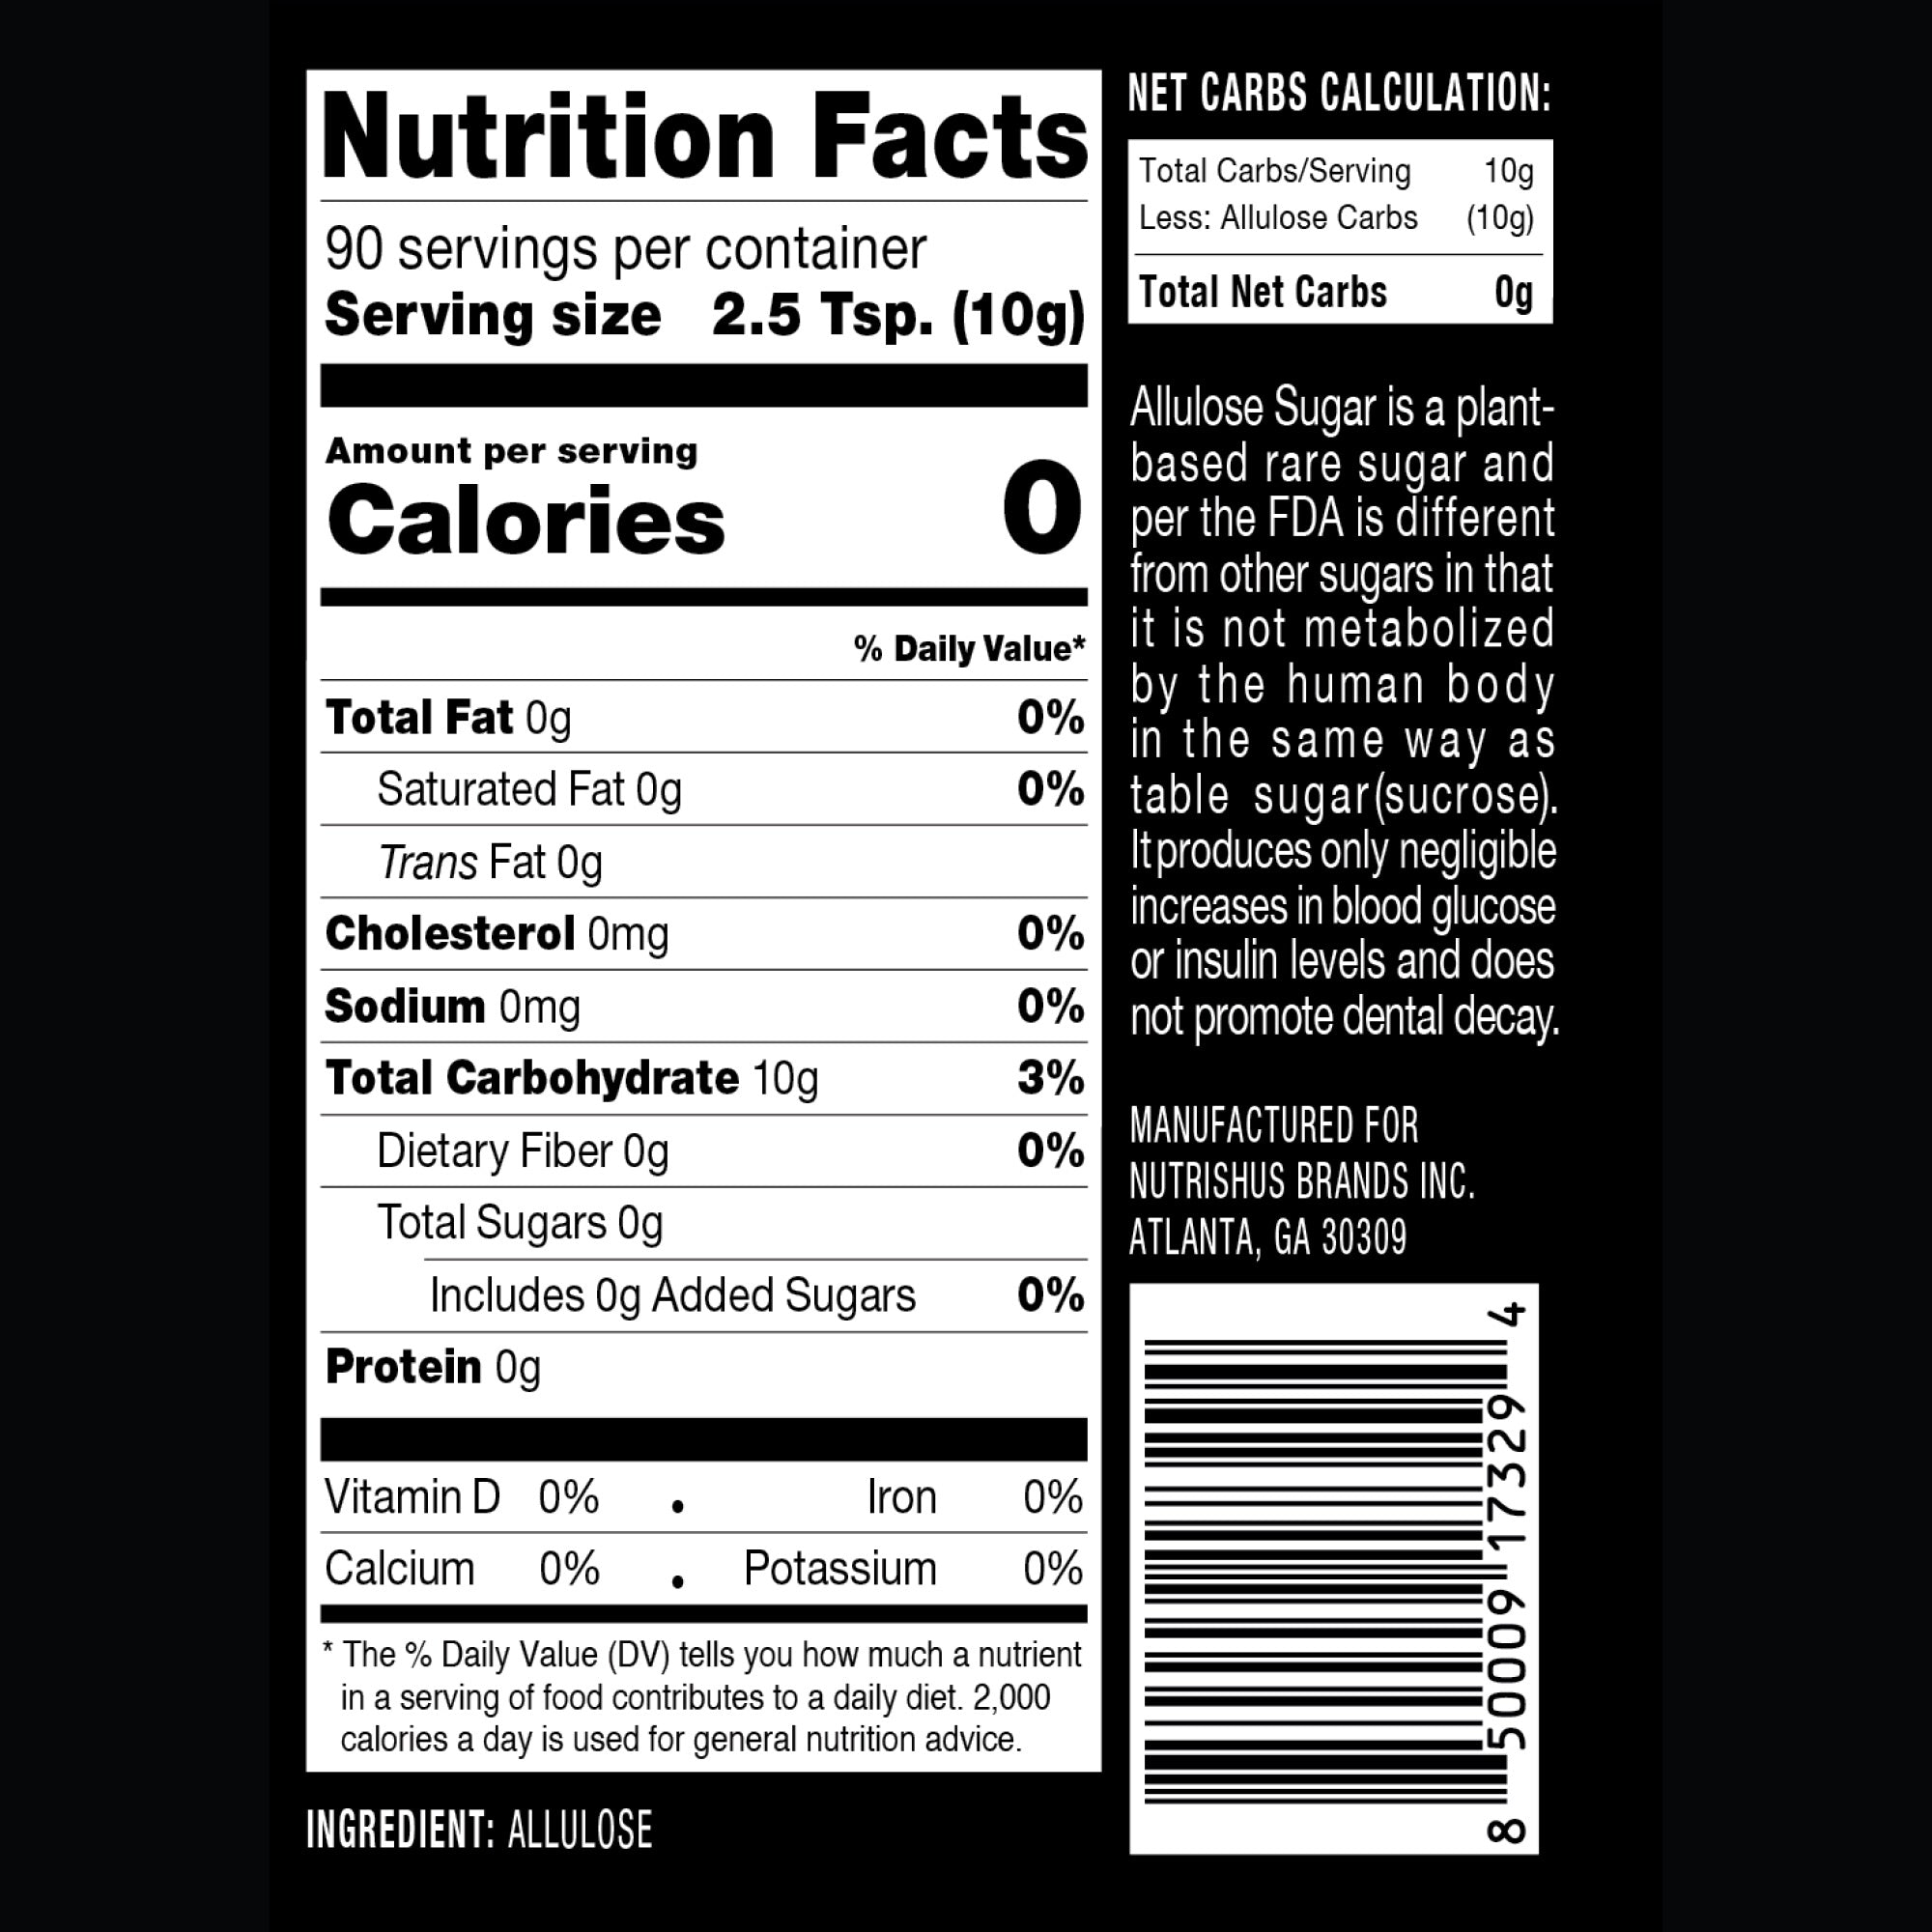 Nutrition Facts for RxSugar 2 Pound Canister product - 90 Servings Per Container